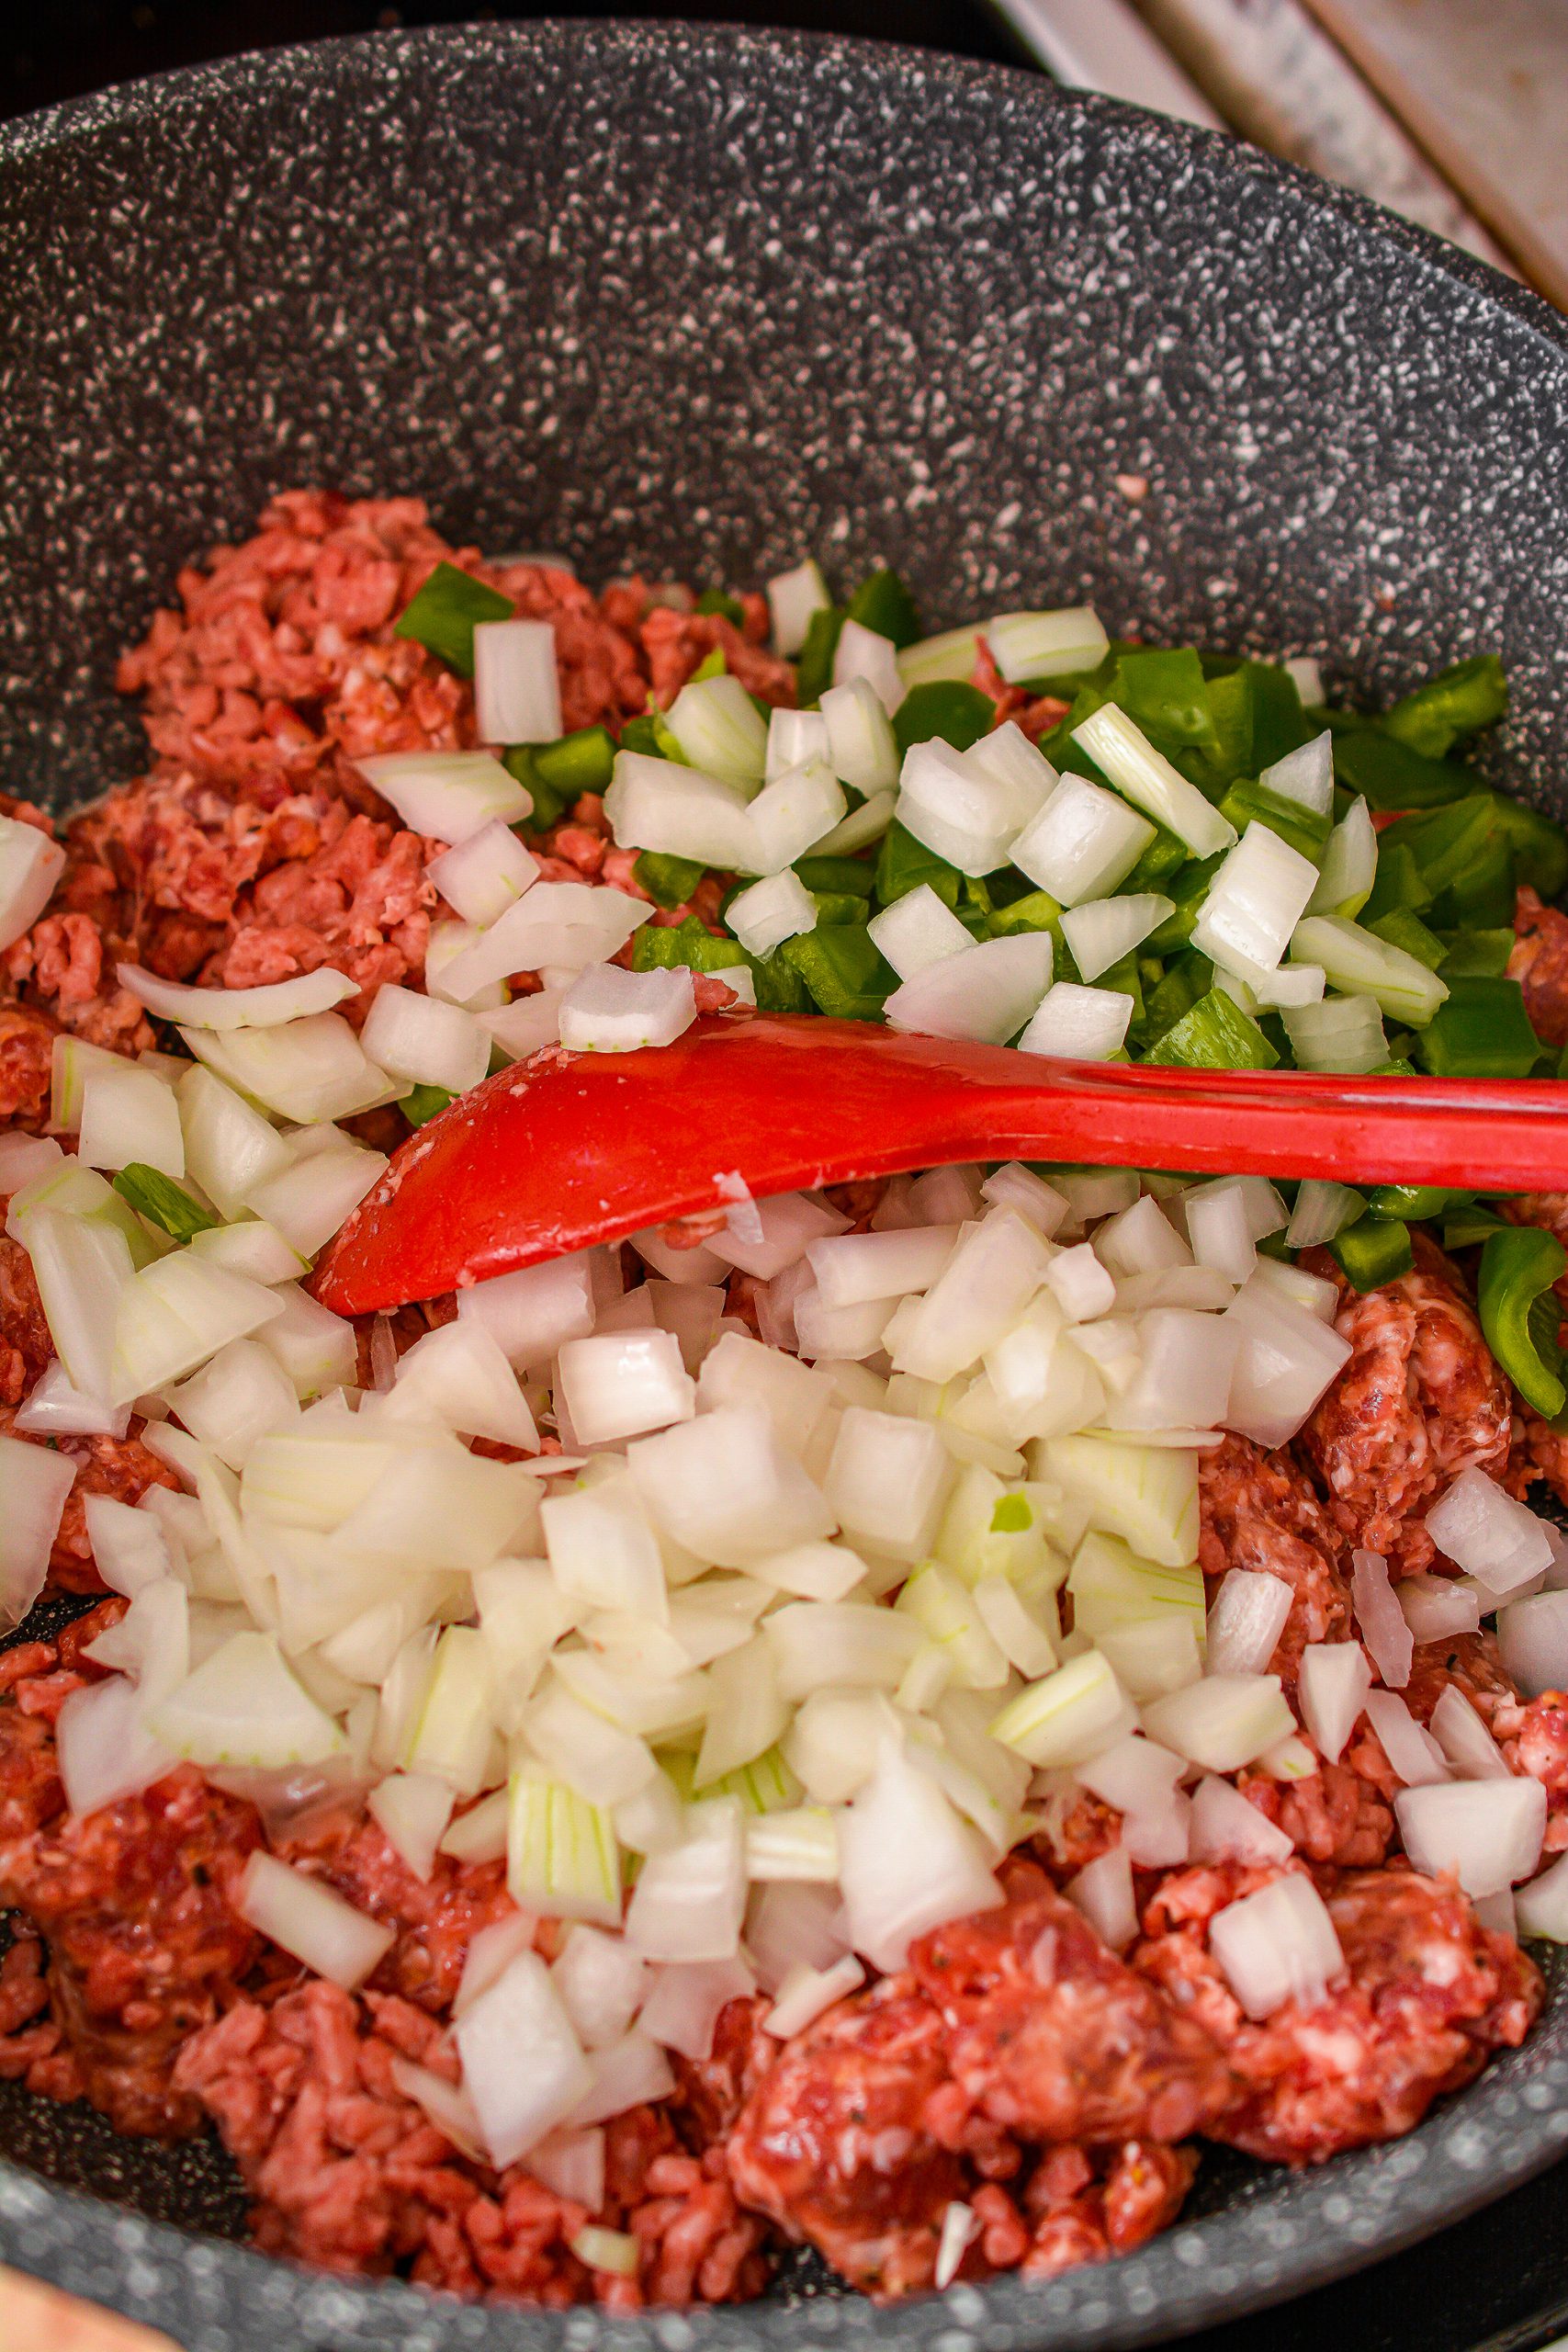 Cook the meat and vegetables over medium-high heat in a large skillet until the meat is browned completely, and the vegetables have begun to soften. 